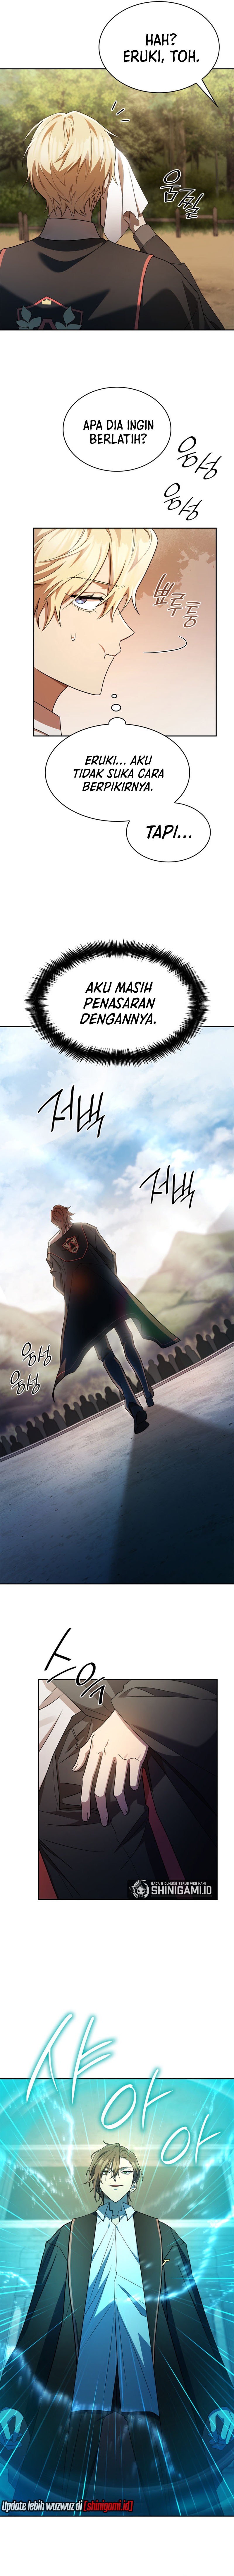 infinite-mage Chapter 44